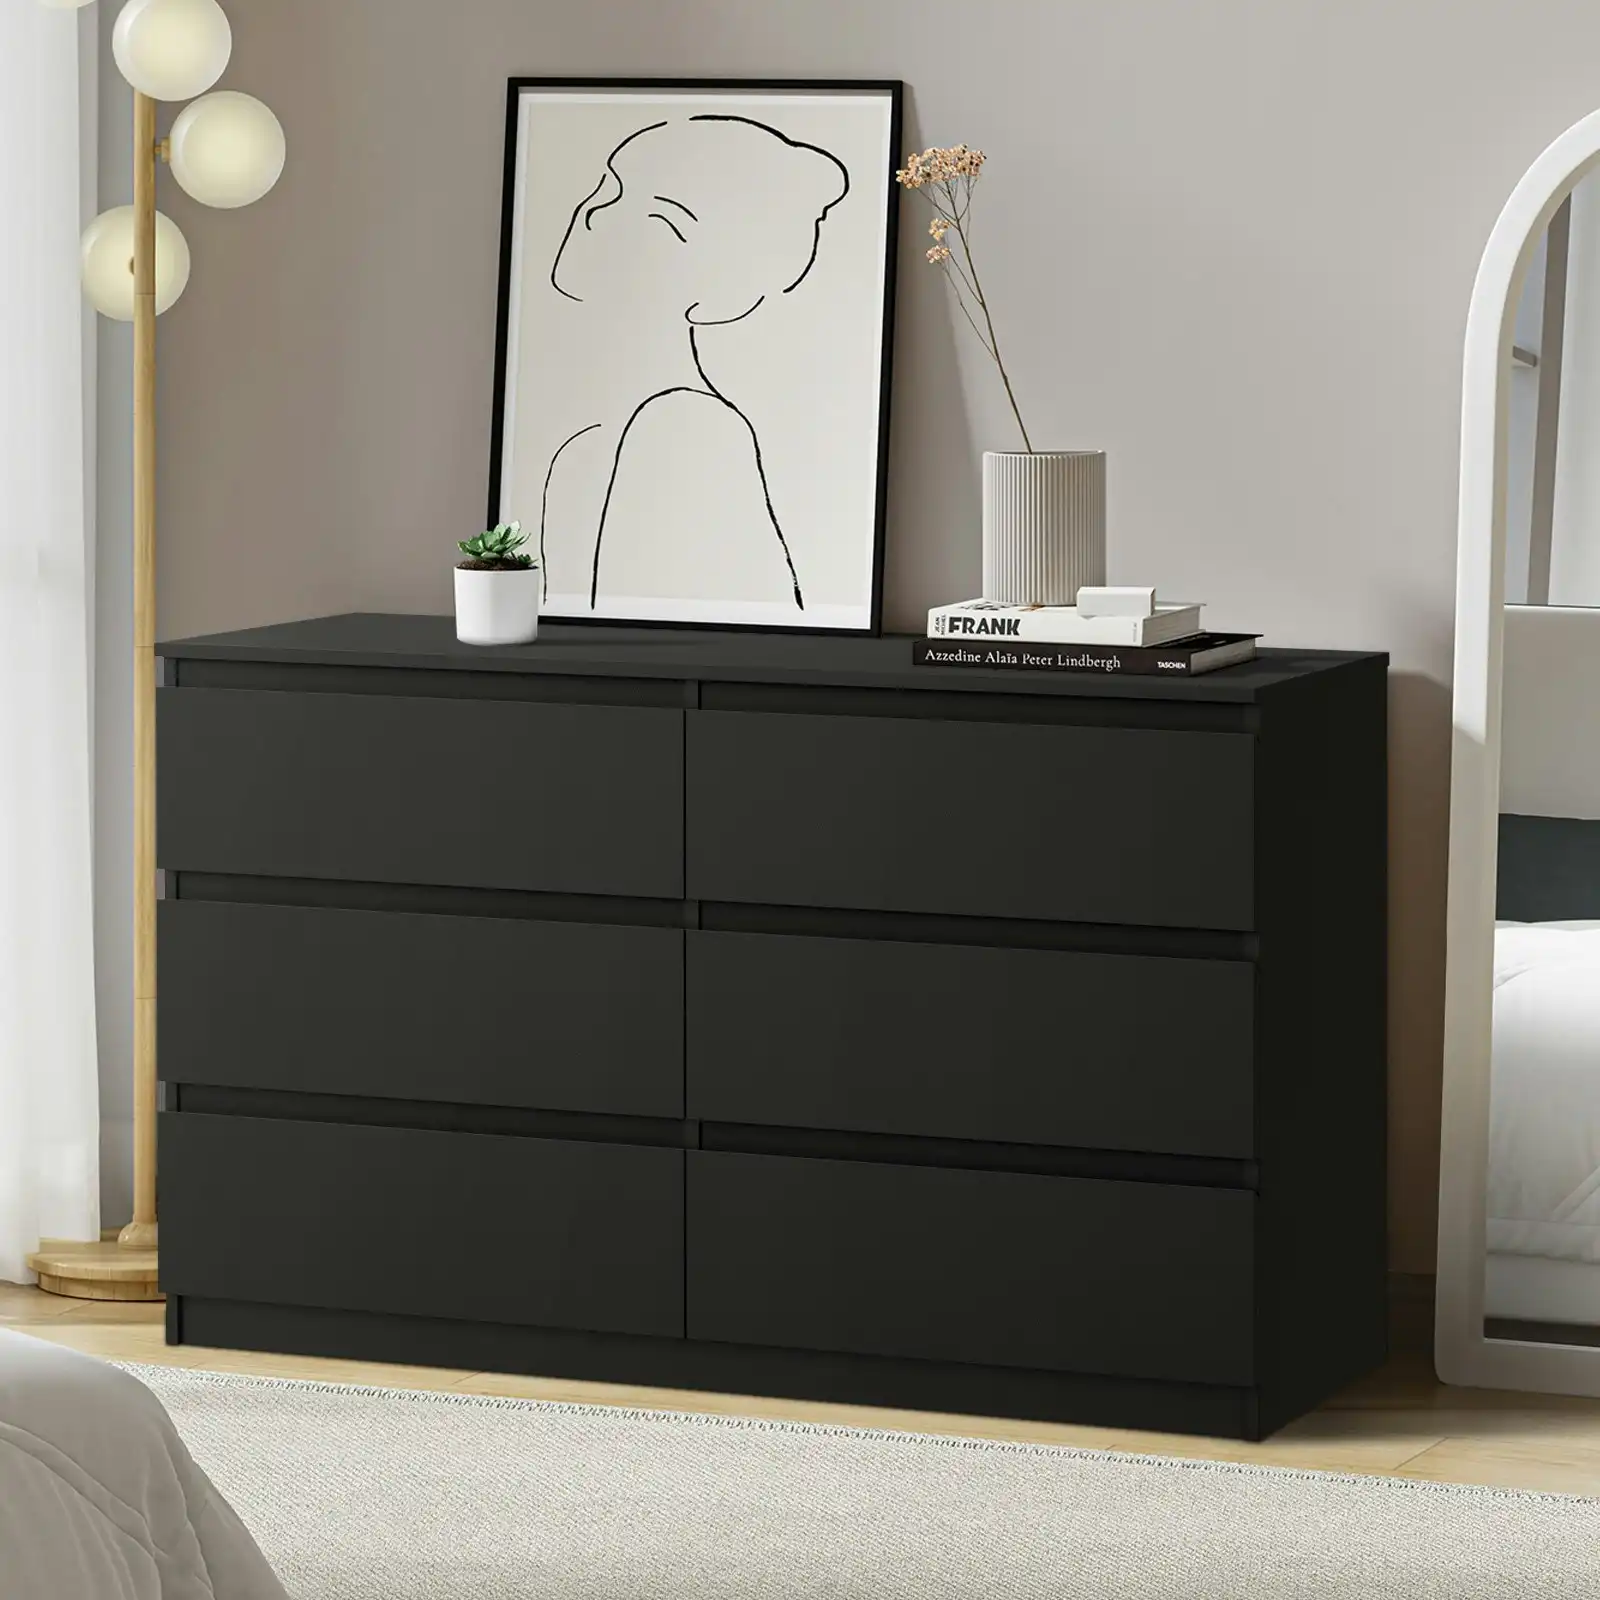 Oikiture 6 Chest of Drawers Lowboy Storage Cabinet Dresser Table Bedroom Black